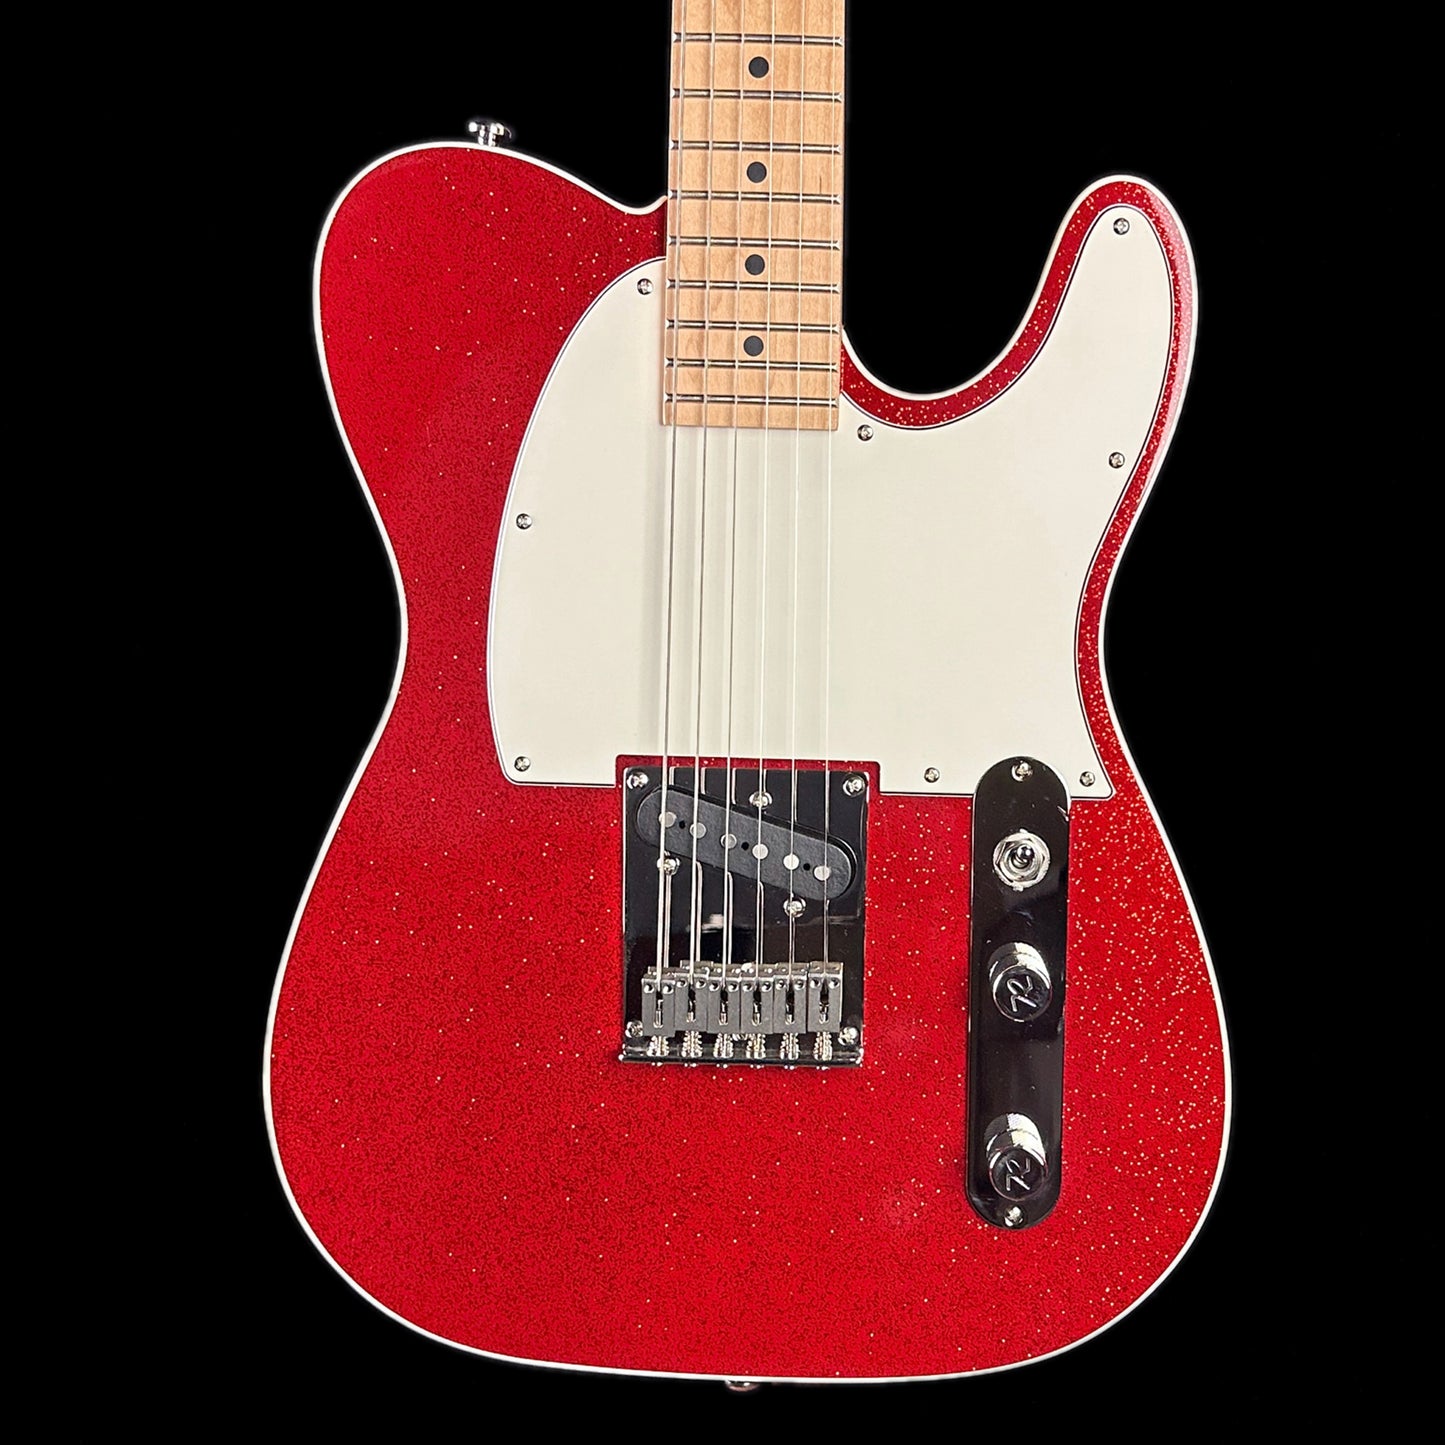 Front of body of Reverend Eastsider T "E" Gloss Red Sparkle Tone Shop Exclusive.